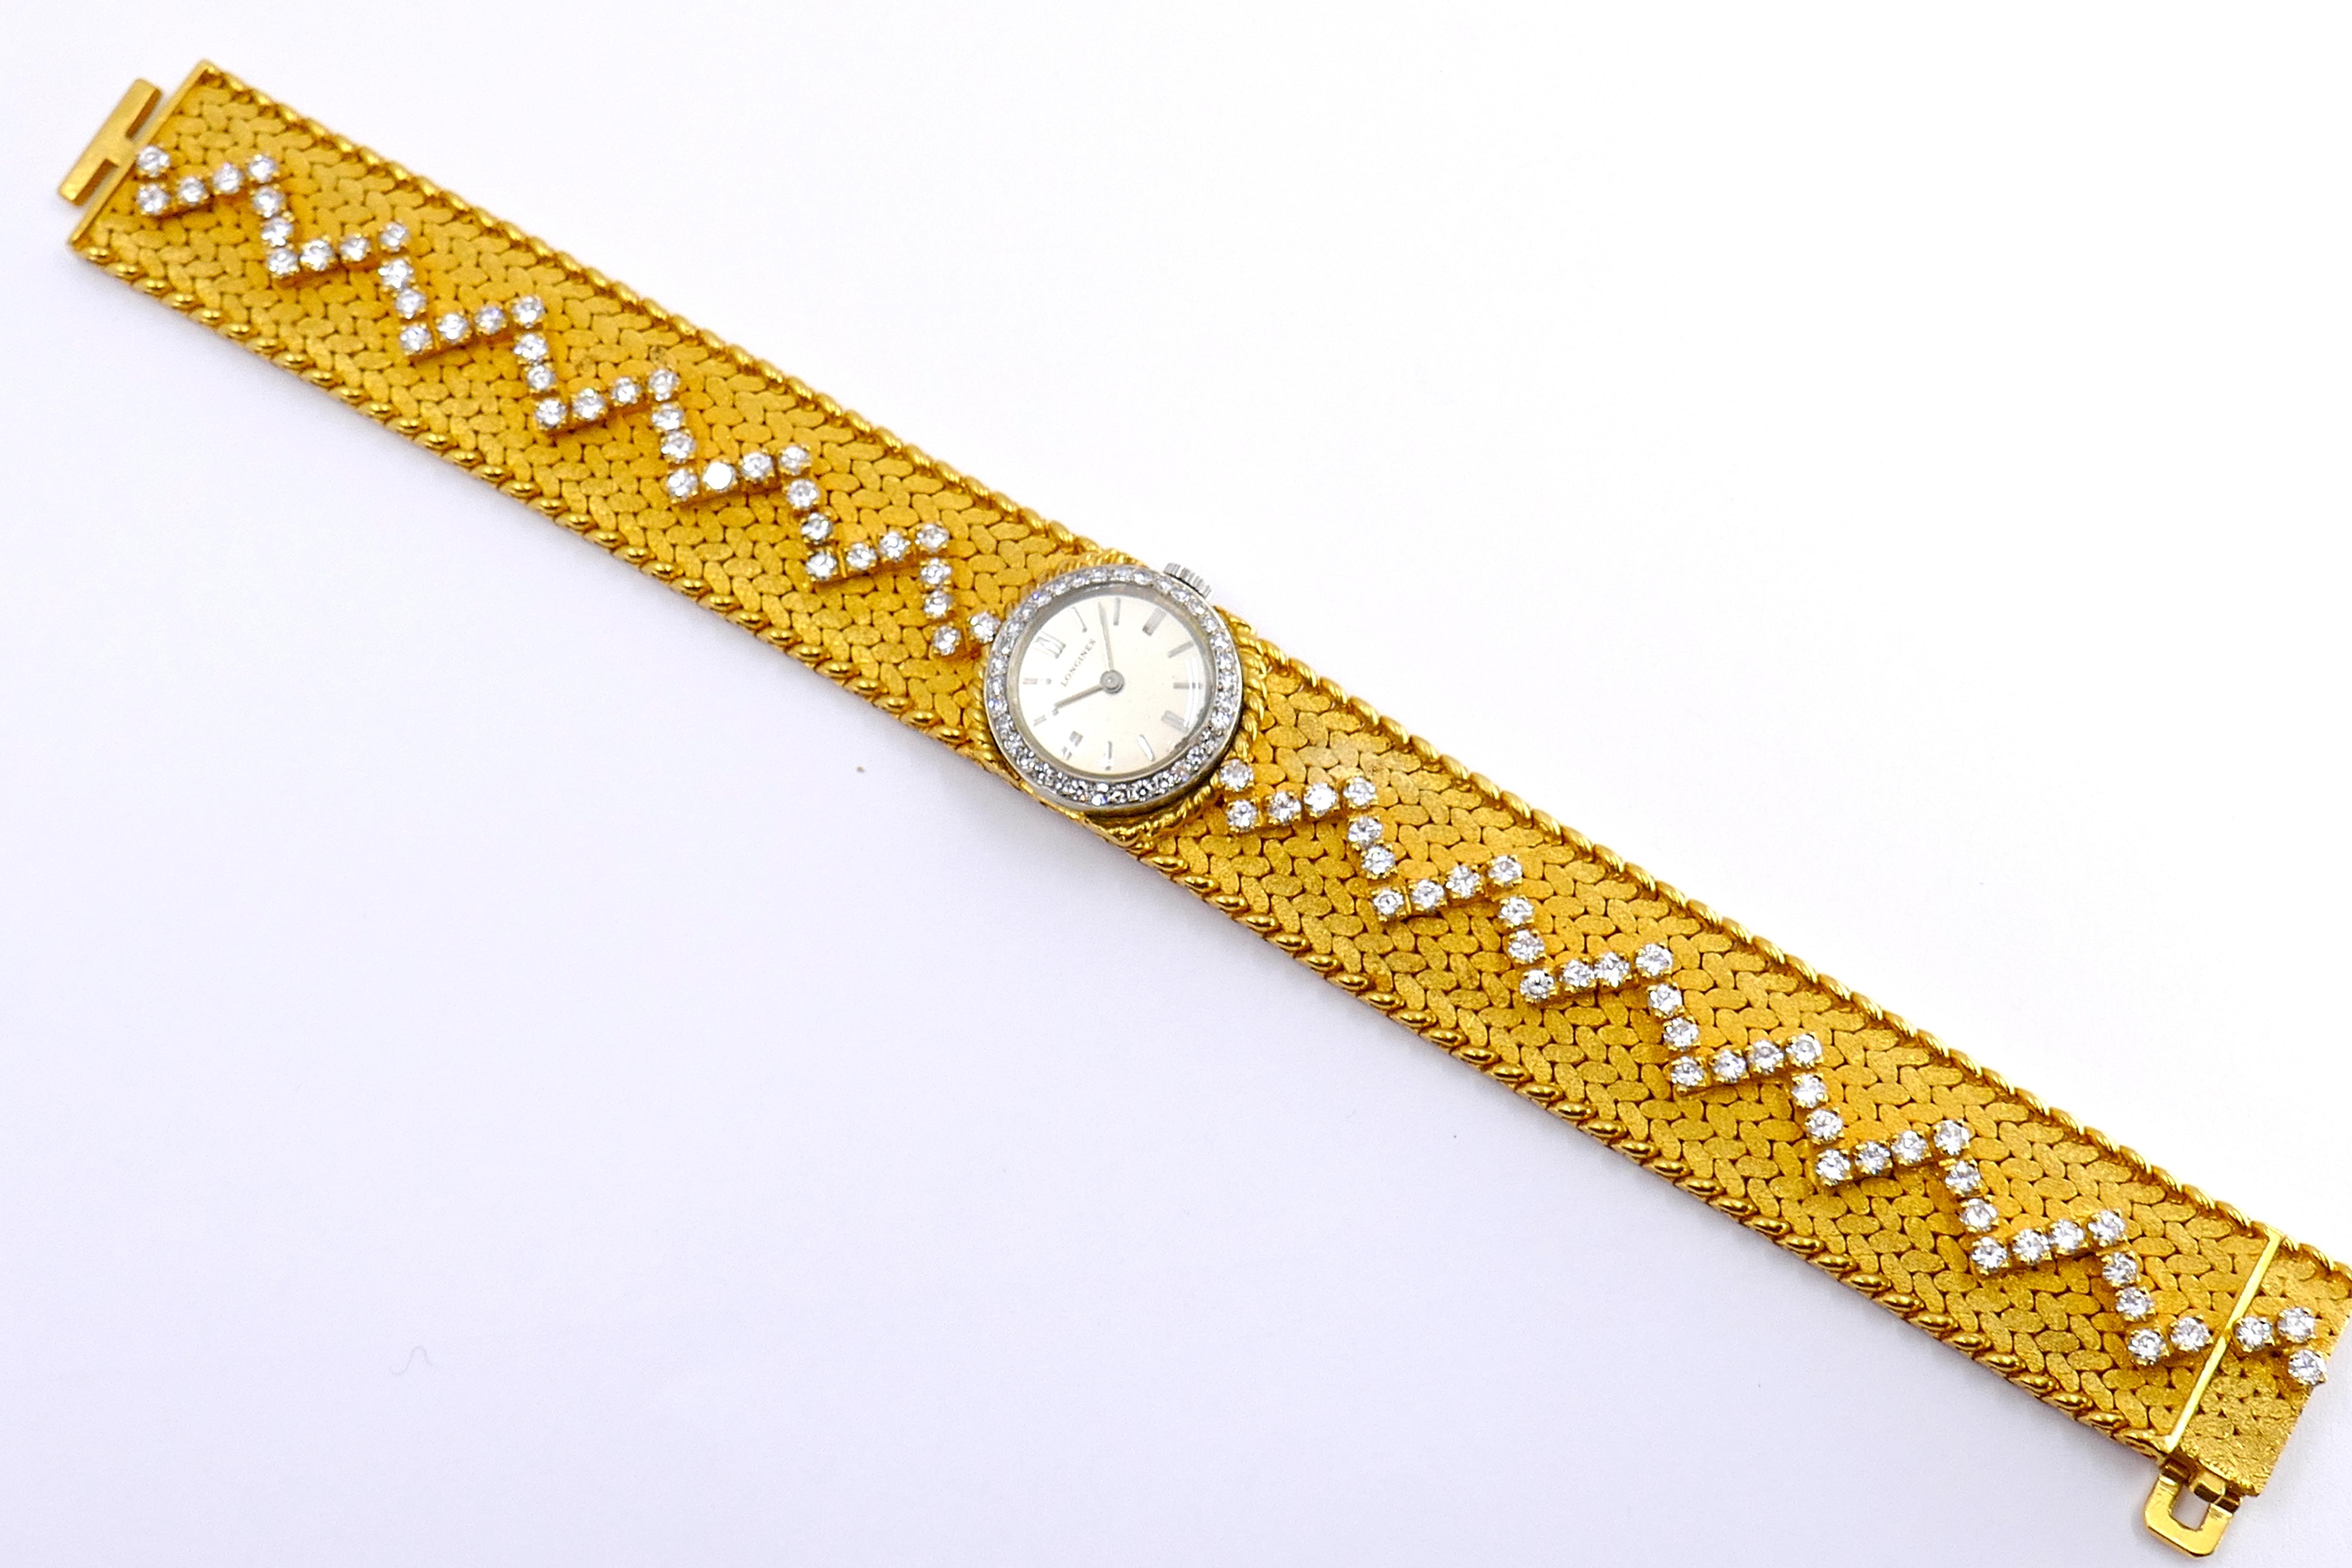 Vintage Cartier 18k Gold Diamond Braided Watch For Sale 2